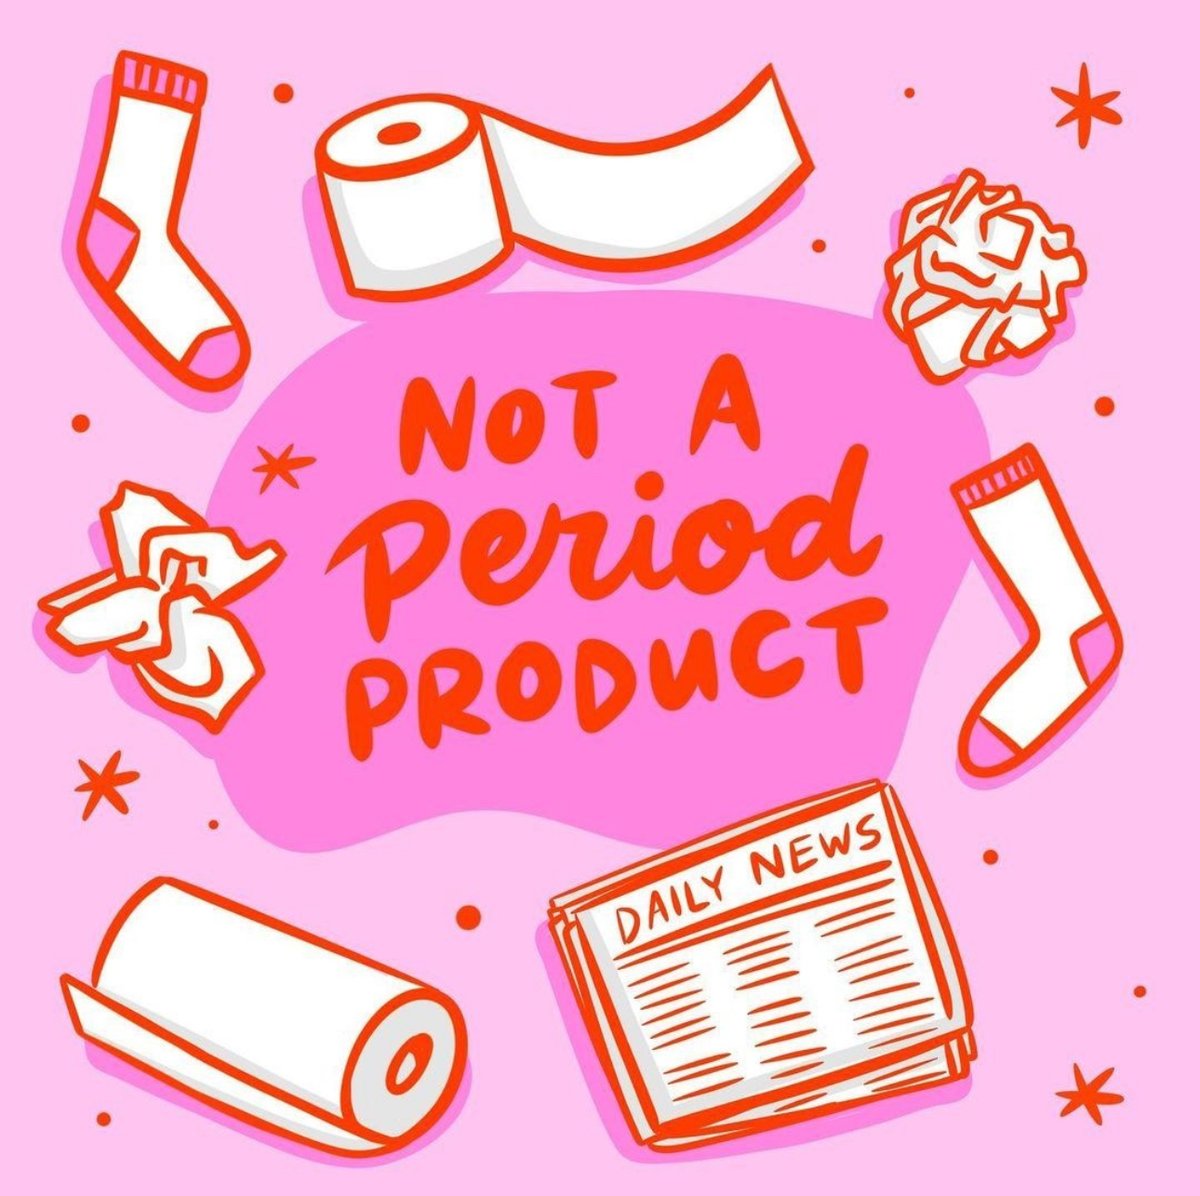 This illustration by artist Kelley Dillon is perfect for #PeriodPovertyAwarenessWeek. Everyone deserves access to #MenstrualProducts.